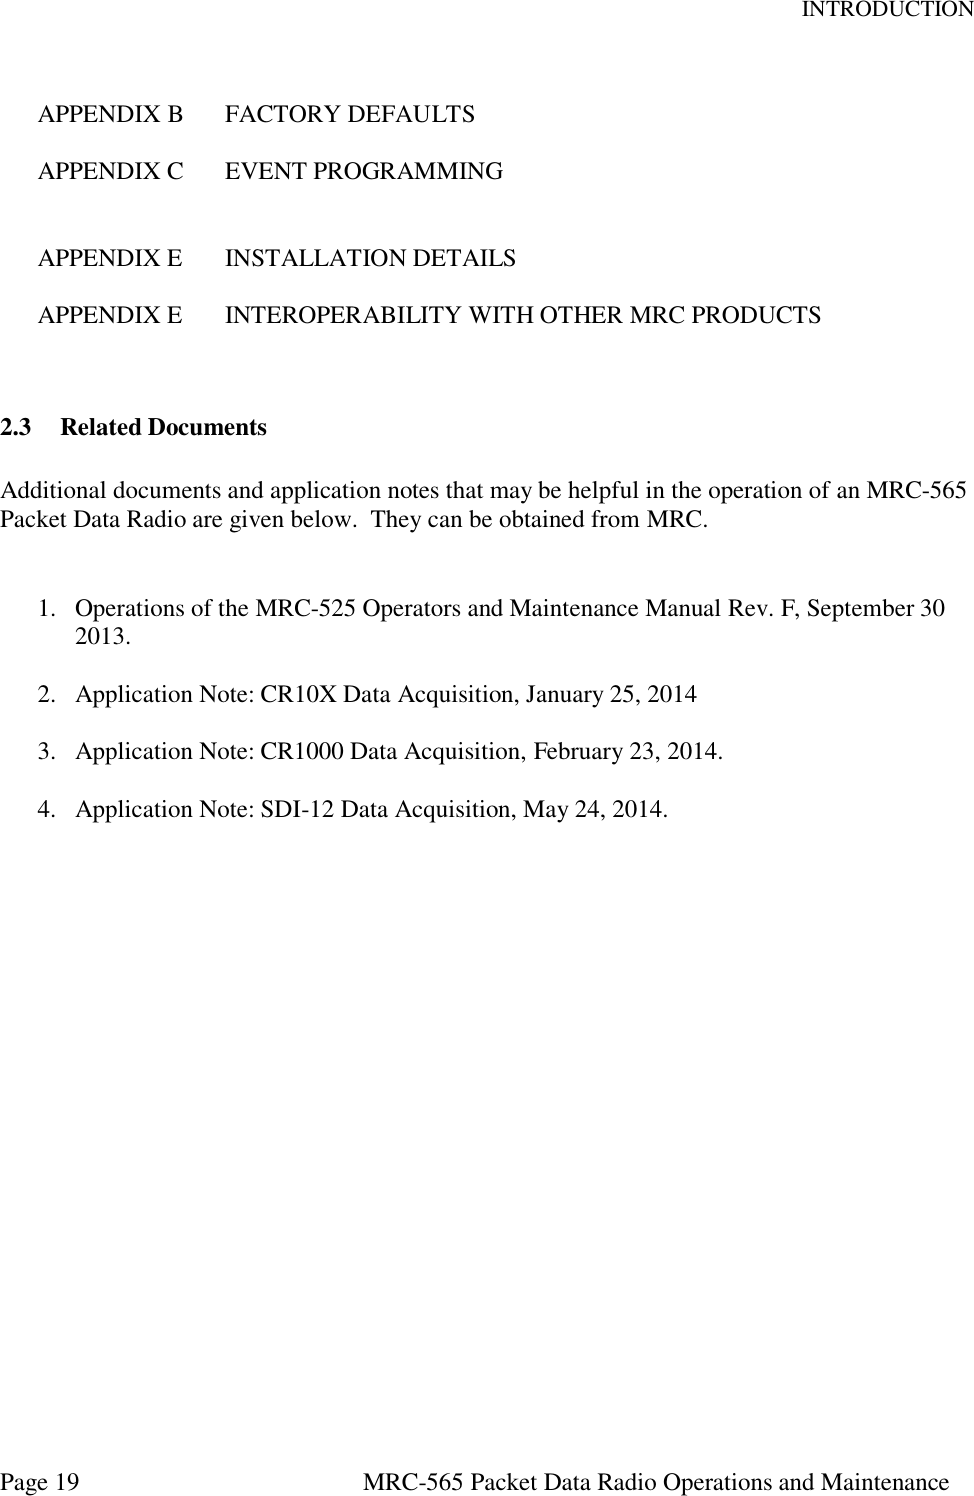 INTRODUCTION Page 19  MRC-565 Packet Data Radio Operations and Maintenance  APPENDIX B  FACTORY DEFAULTS  APPENDIX C  EVENT PROGRAMMING   APPENDIX E  INSTALLATION DETAILS  APPENDIX E  INTEROPERABILITY WITH OTHER MRC PRODUCTS   2.3 Related Documents  Additional documents and application notes that may be helpful in the operation of an MRC-565 Packet Data Radio are given below.  They can be obtained from MRC.   1. Operations of the MRC-525 Operators and Maintenance Manual Rev. F, September 30 2013.  2. Application Note: CR10X Data Acquisition, January 25, 2014   3. Application Note: CR1000 Data Acquisition, February 23, 2014.   4. Application Note: SDI-12 Data Acquisition, May 24, 2014.      